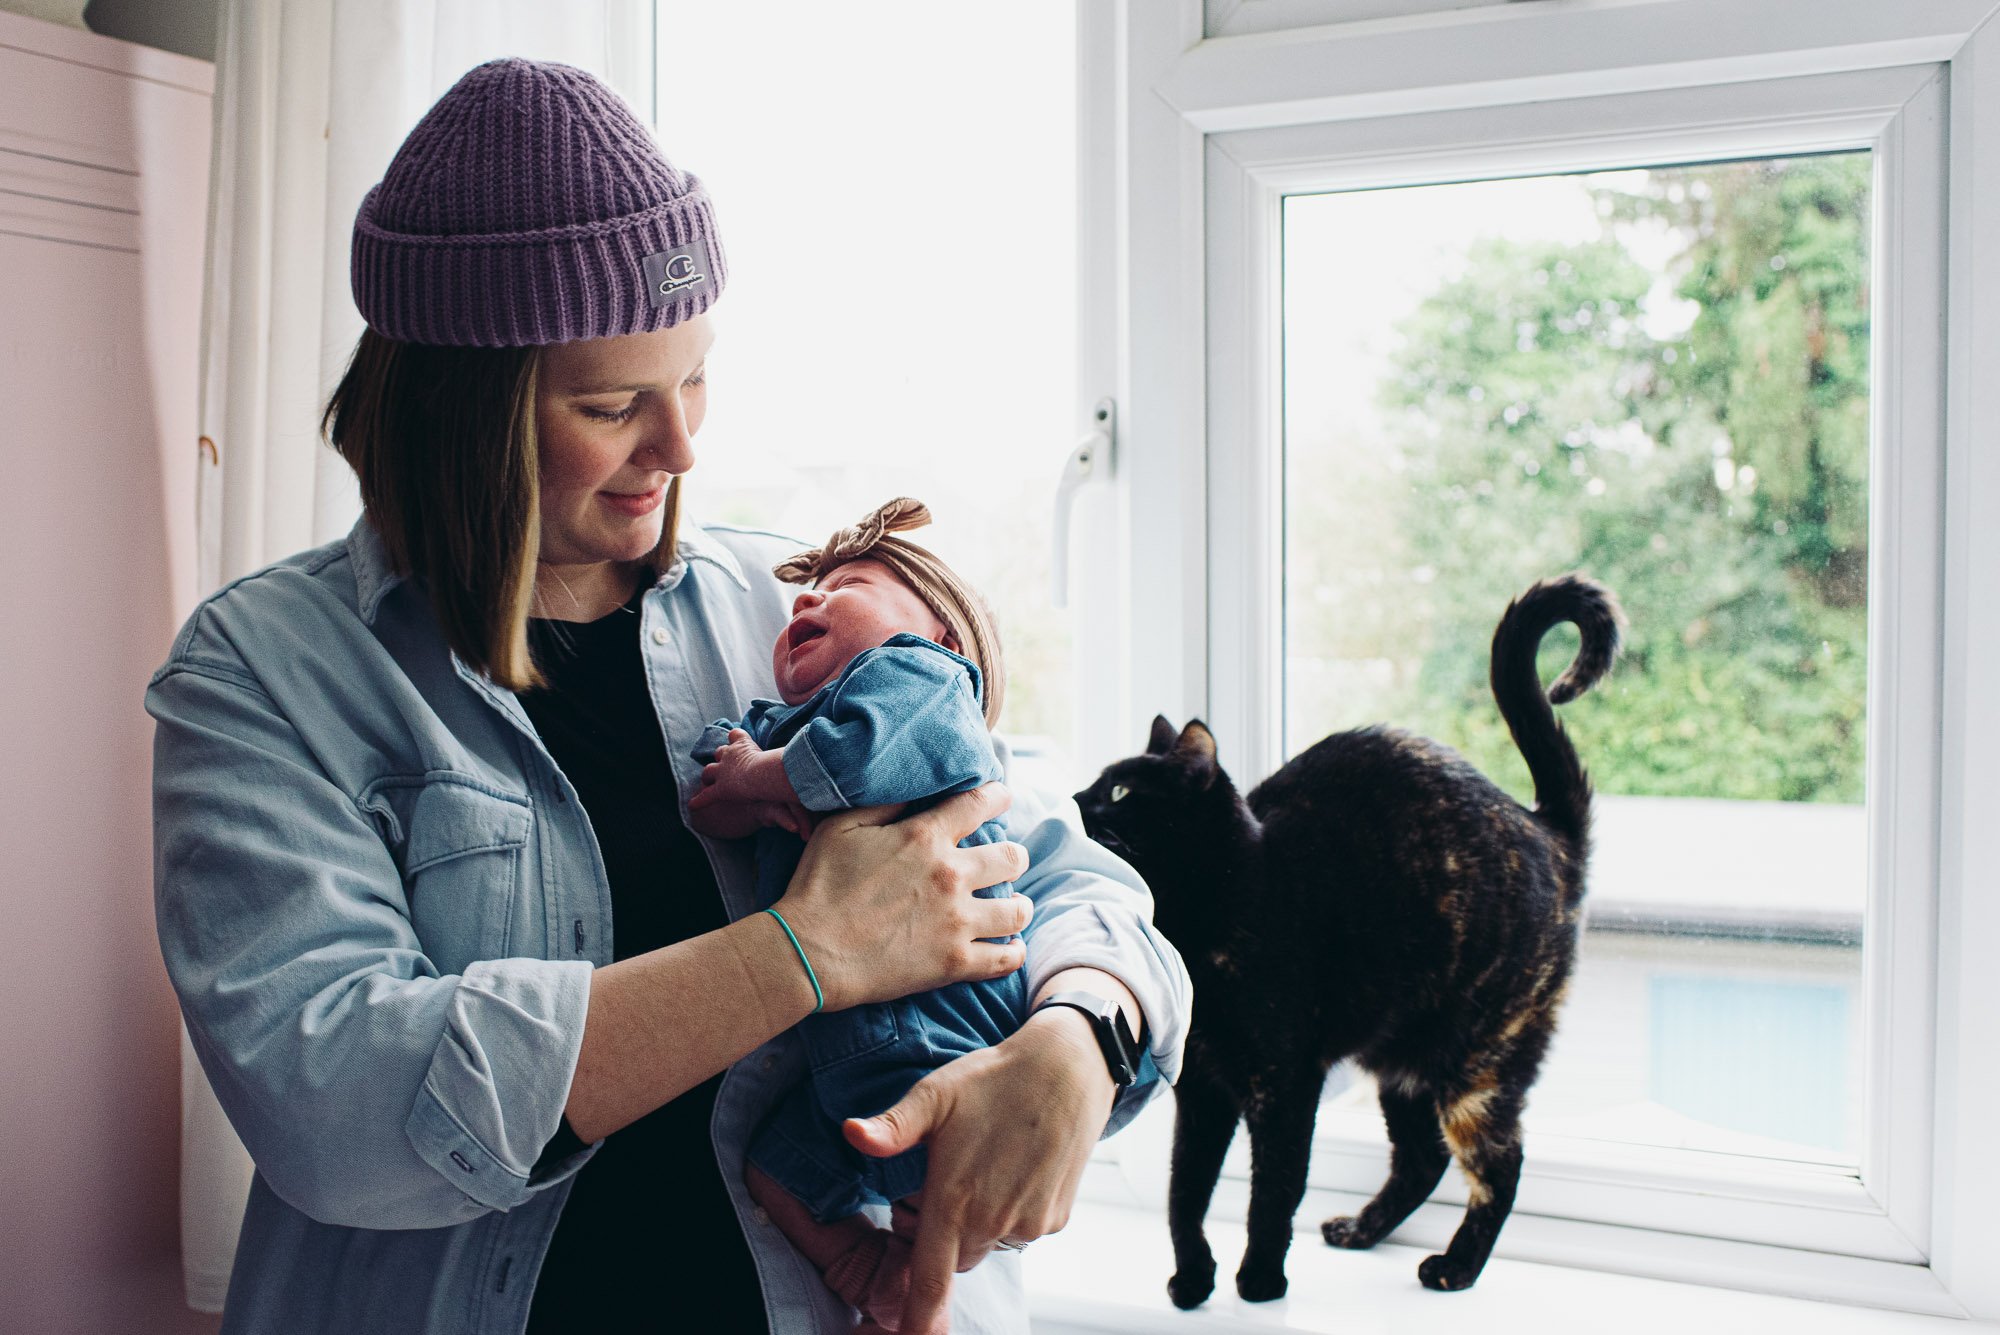 newborn-photography-at-home-brighton-hove-sussex-mother-baby-girl-cat-window.jpg